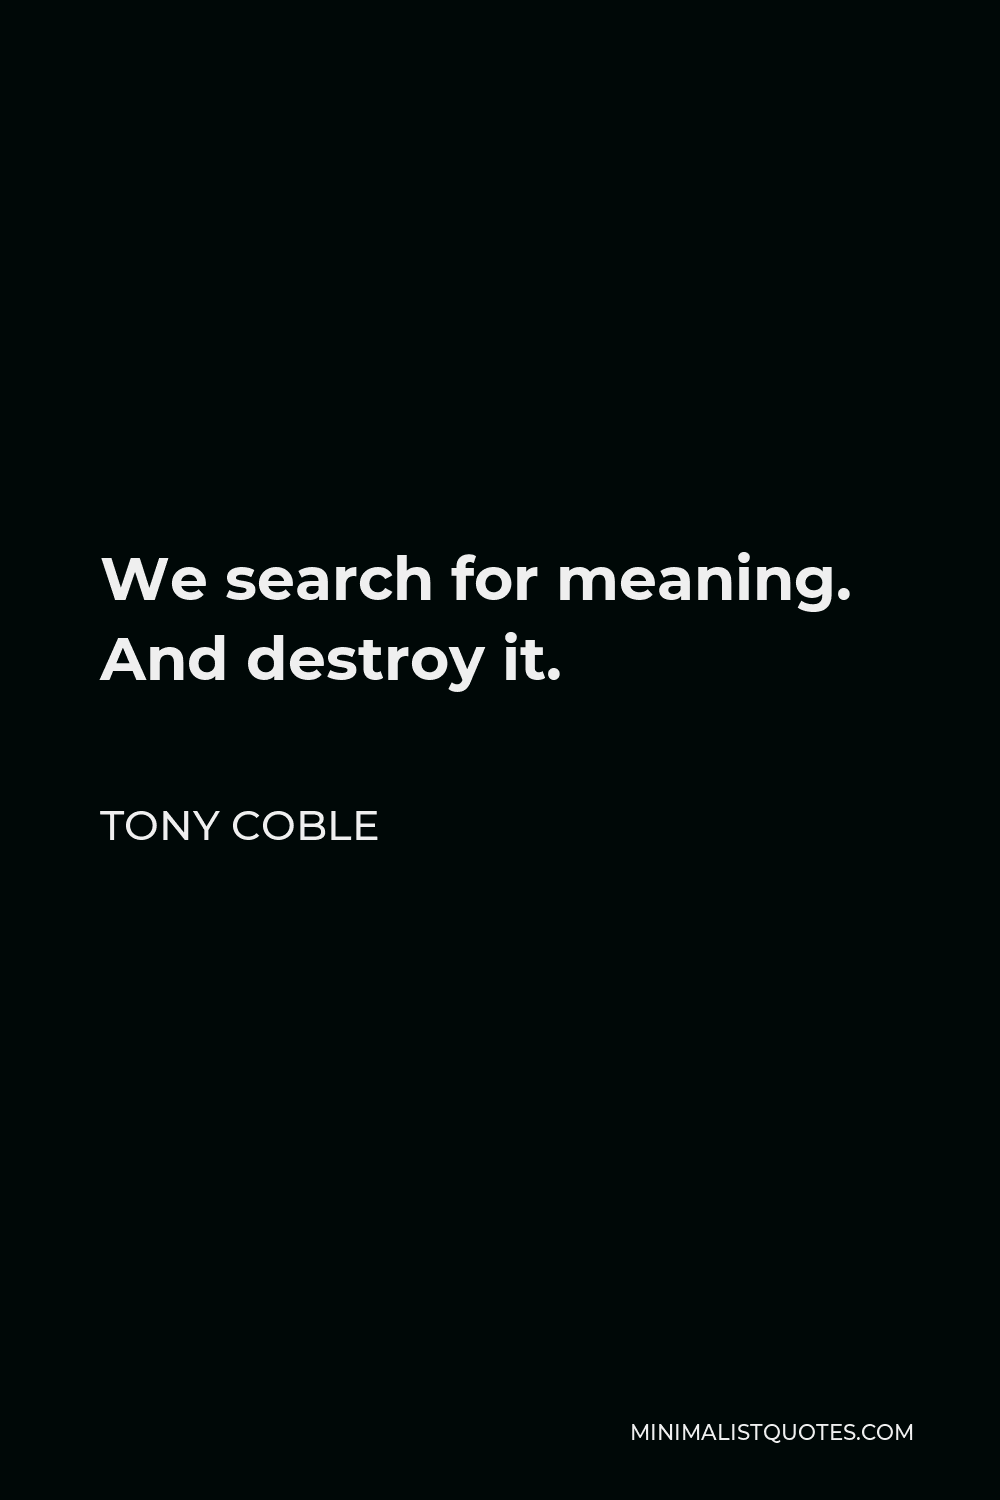 Tony Coble Quote - We search for meaning. And destroy it.